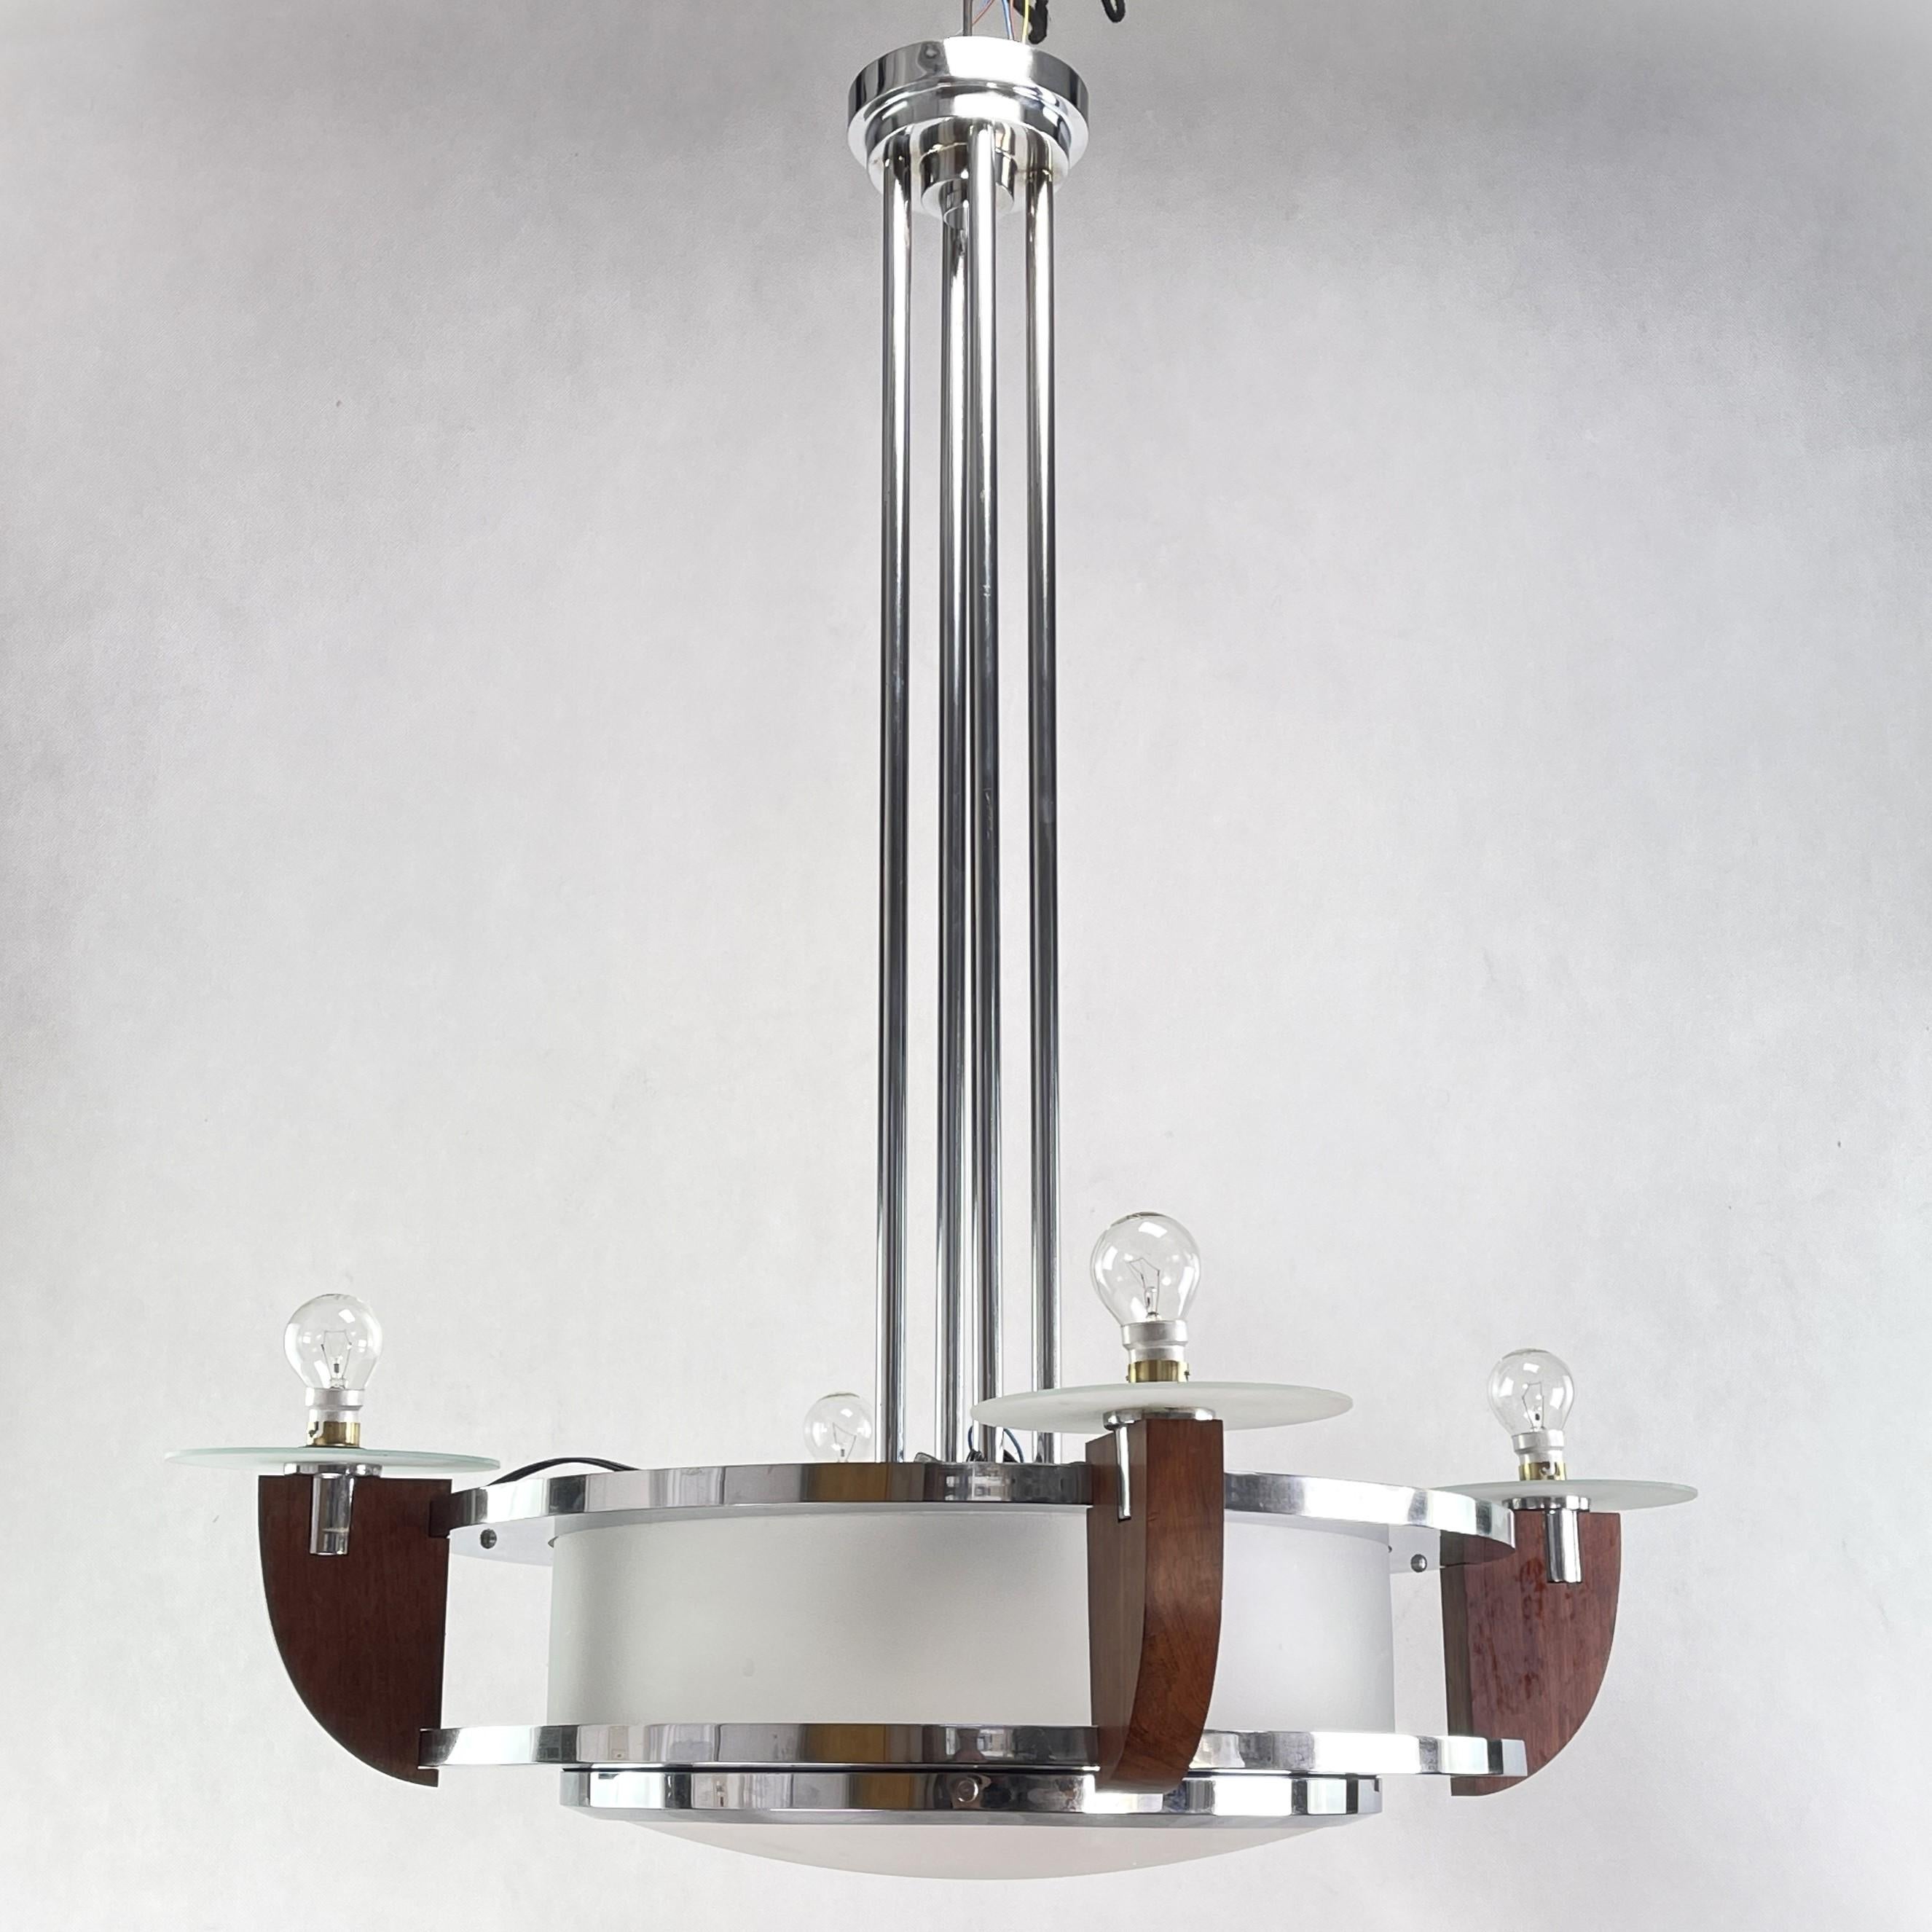 This imposing heavy pendant lamp captivates with its simple and matter-of-fact Art Deco design. The lamp gives a very pleasant light. 
The impressive lamp is an absolute eye-catcher. The lamp still has the original old glasses

This ceiling lamp